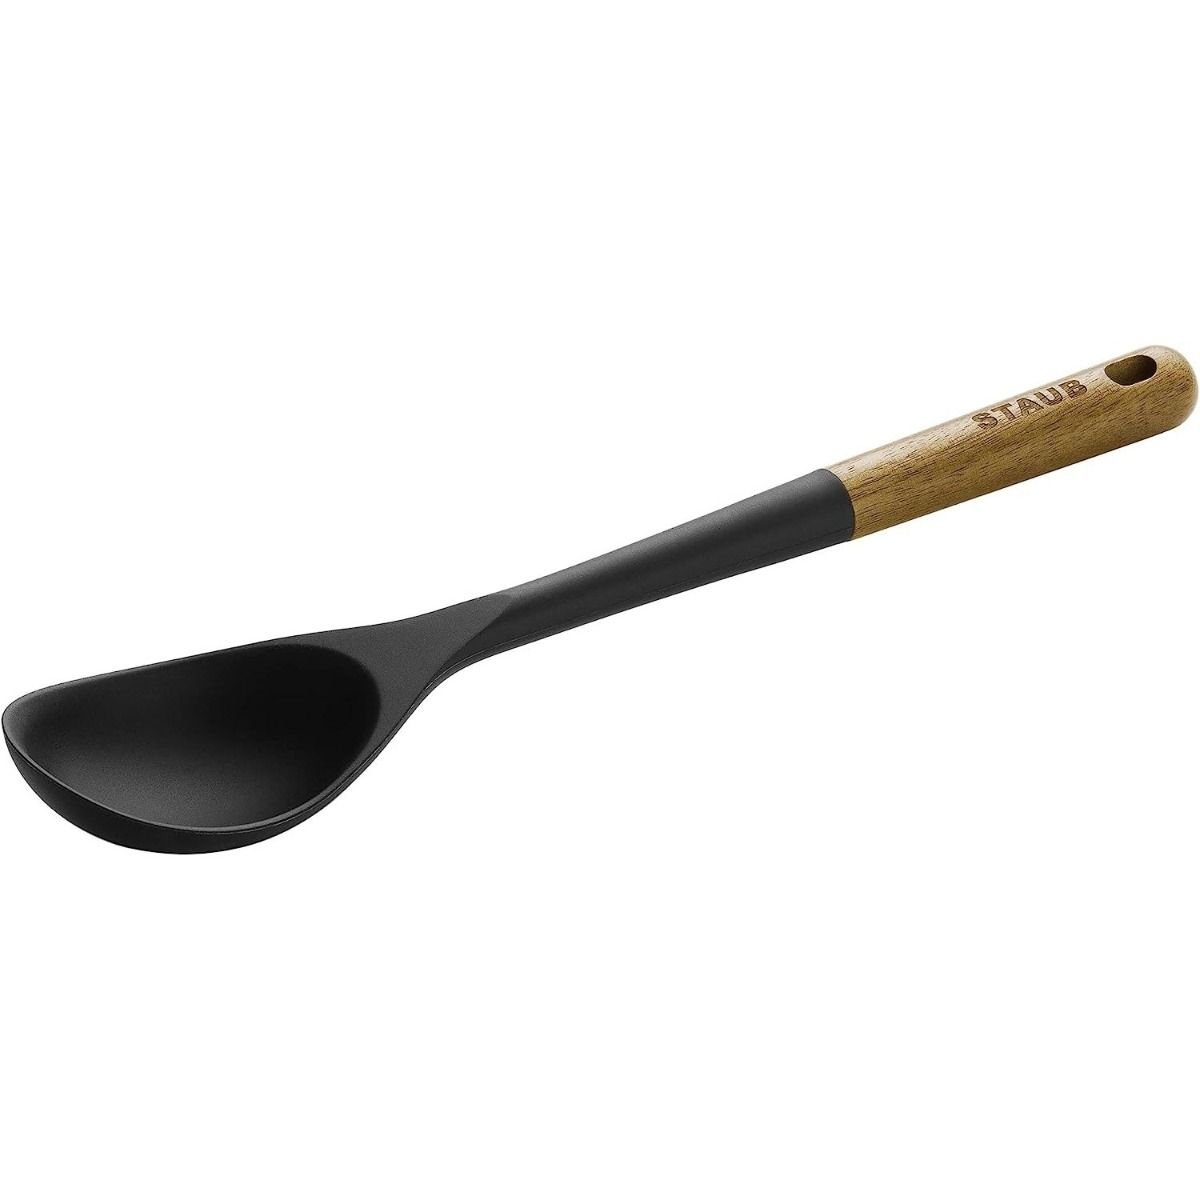  STAUB Multifunction Spatula Spoon, Great for Both Cooking and  Serving Durable BPA-Free Matte Black Silicone, Acacia Wood Handles, Safe  for Nonstick Cooking Surfaces: Home & Kitchen